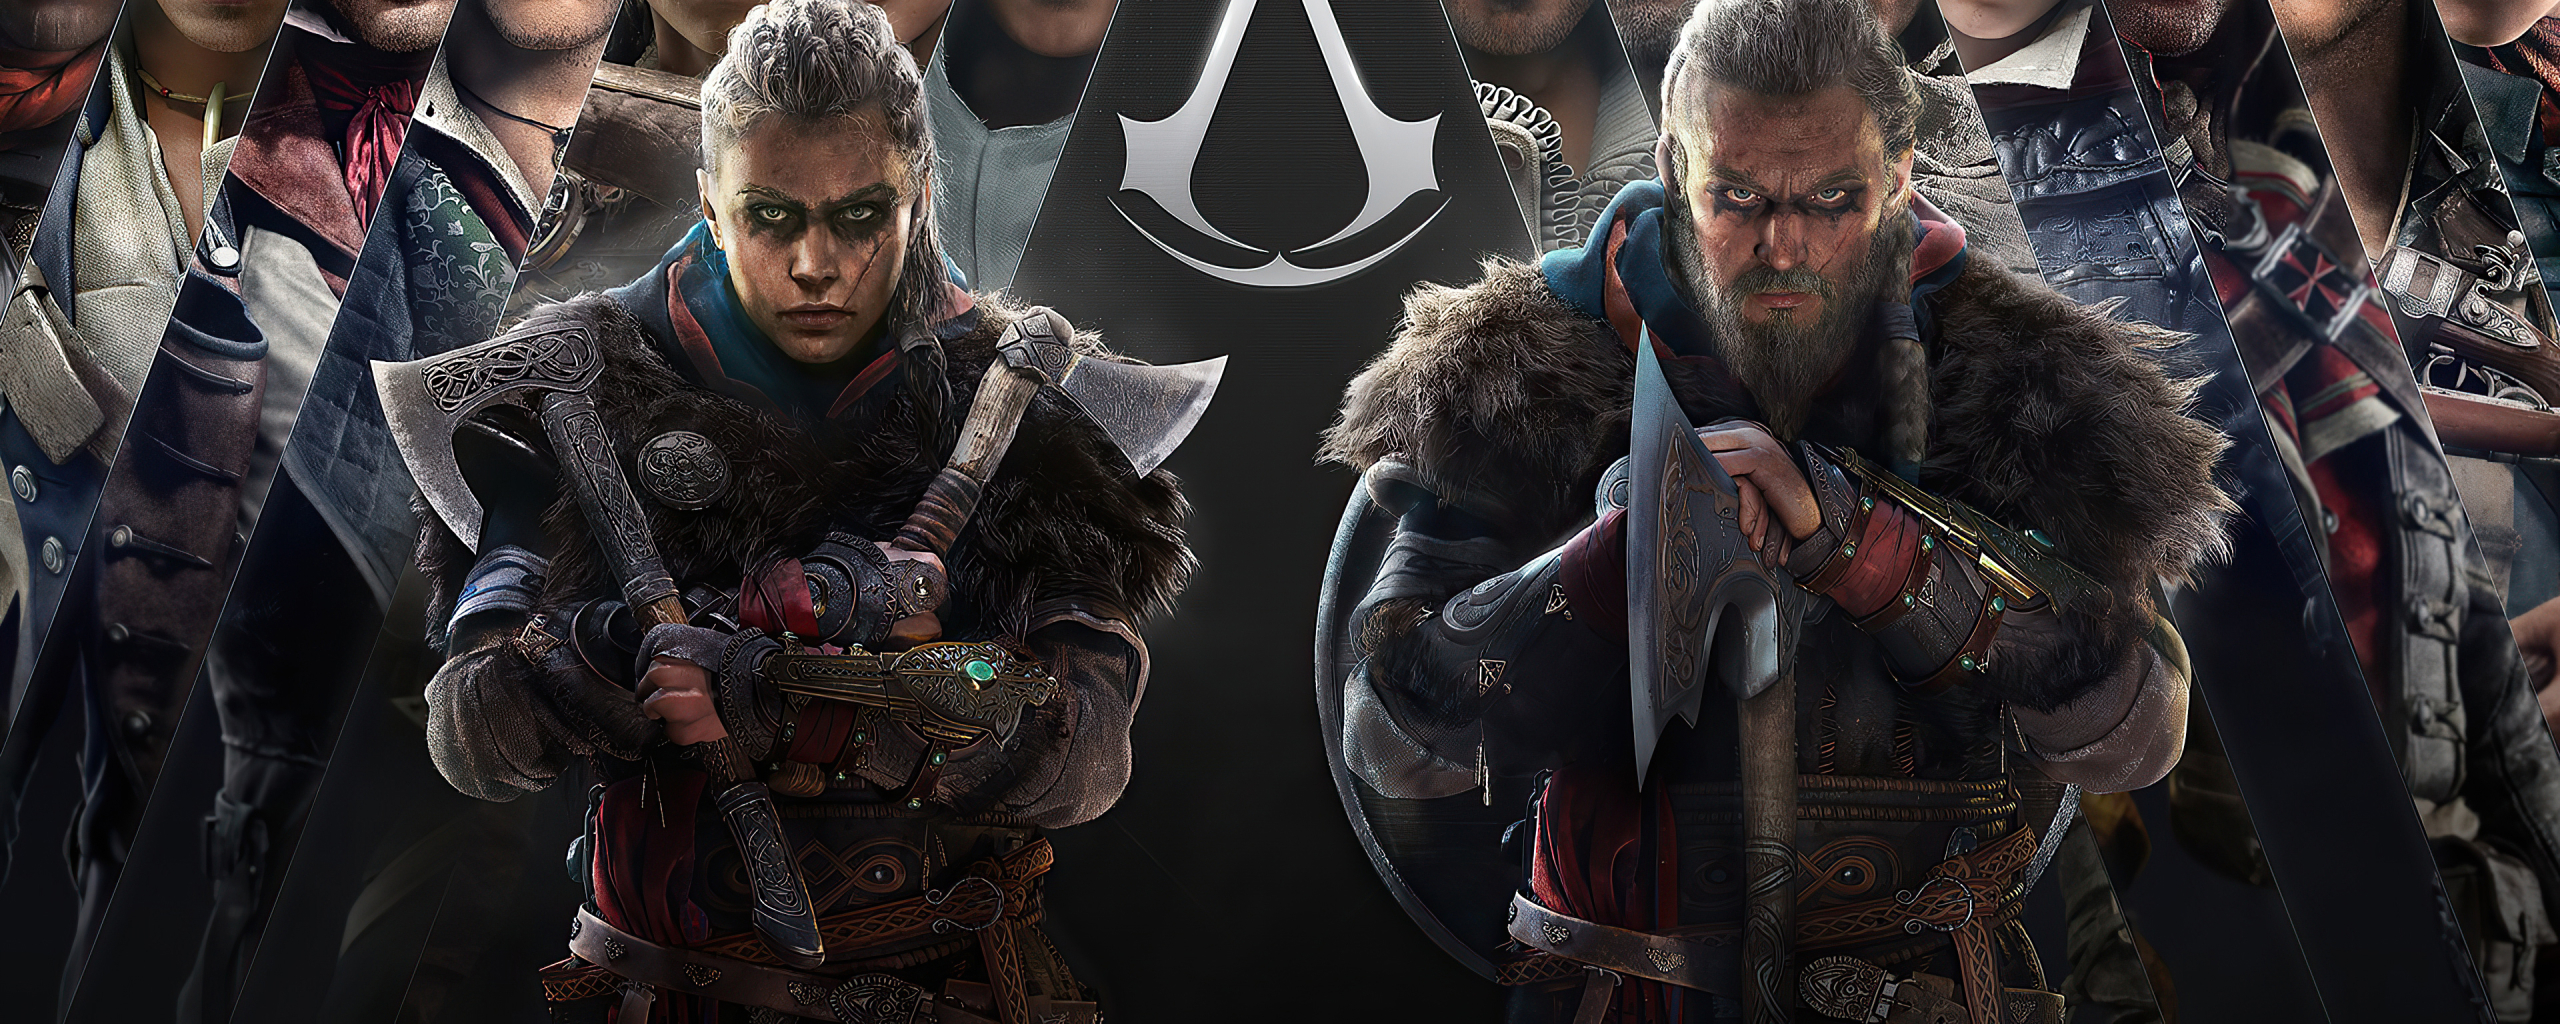 2560x1024 Assassin's Creed Valhalla Vikings Poster 2560x1024 Resolution ...